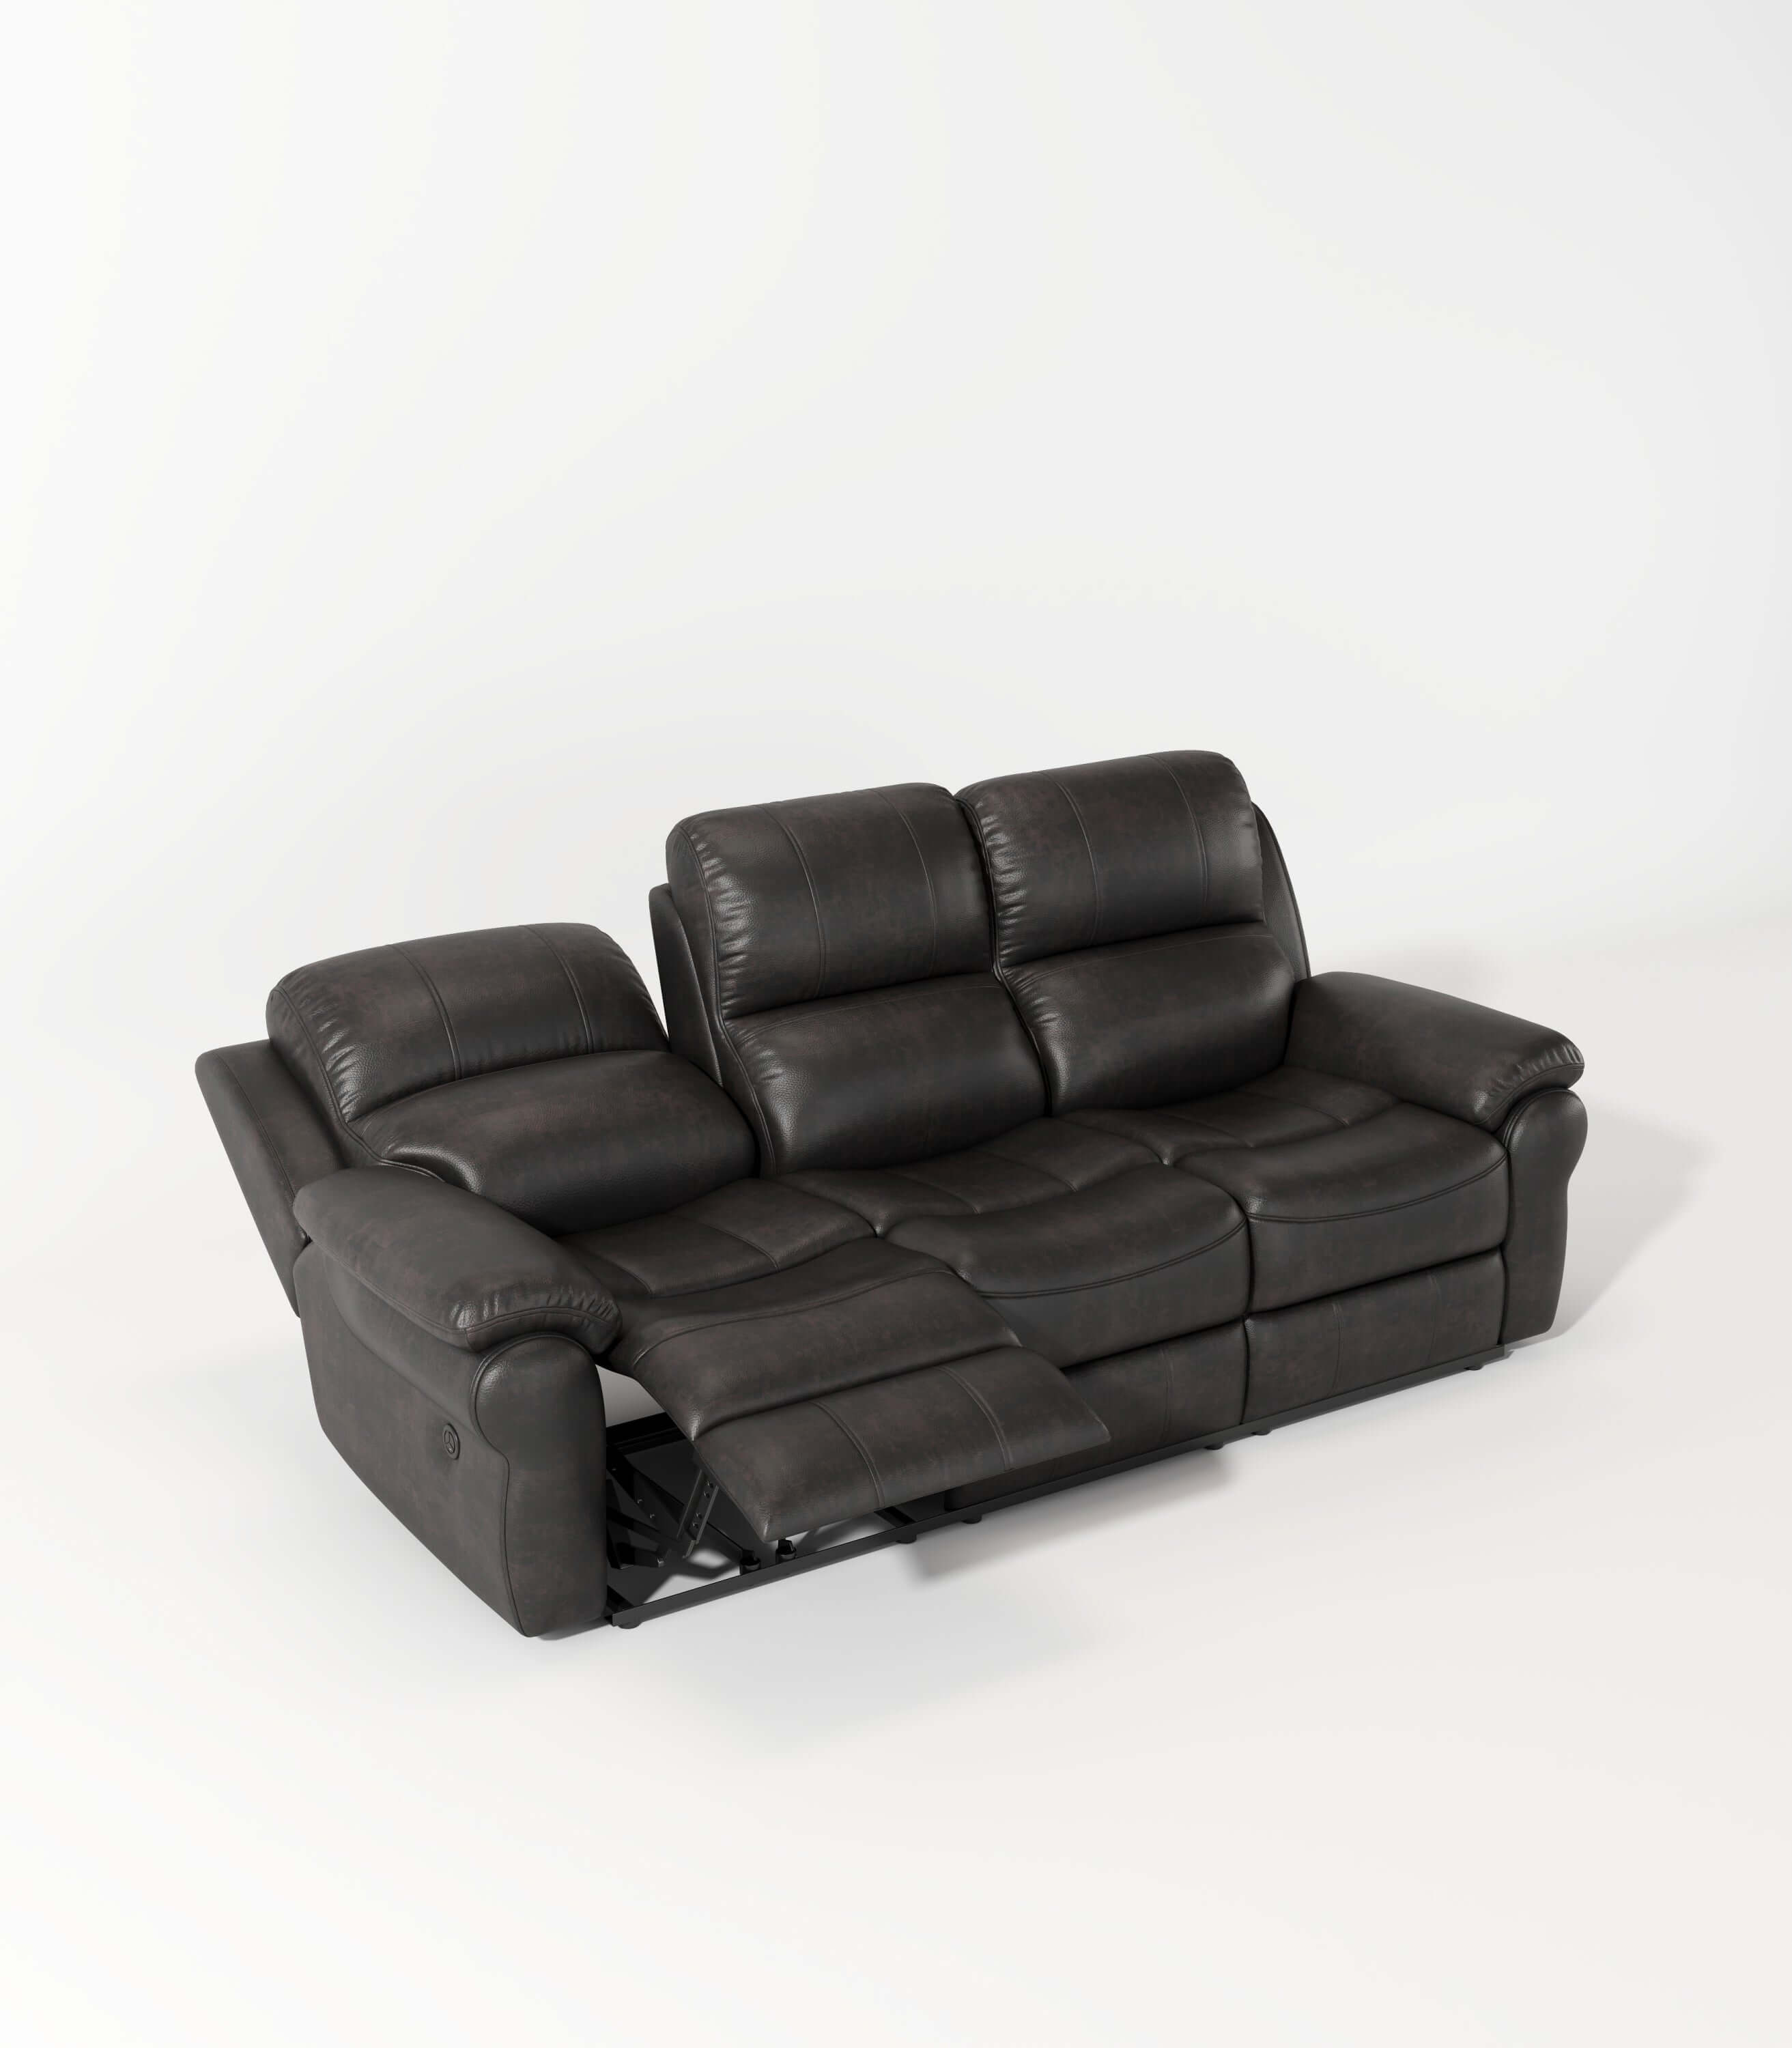 Aria Power Recliner Sofa - Espresso with Wireless Charging